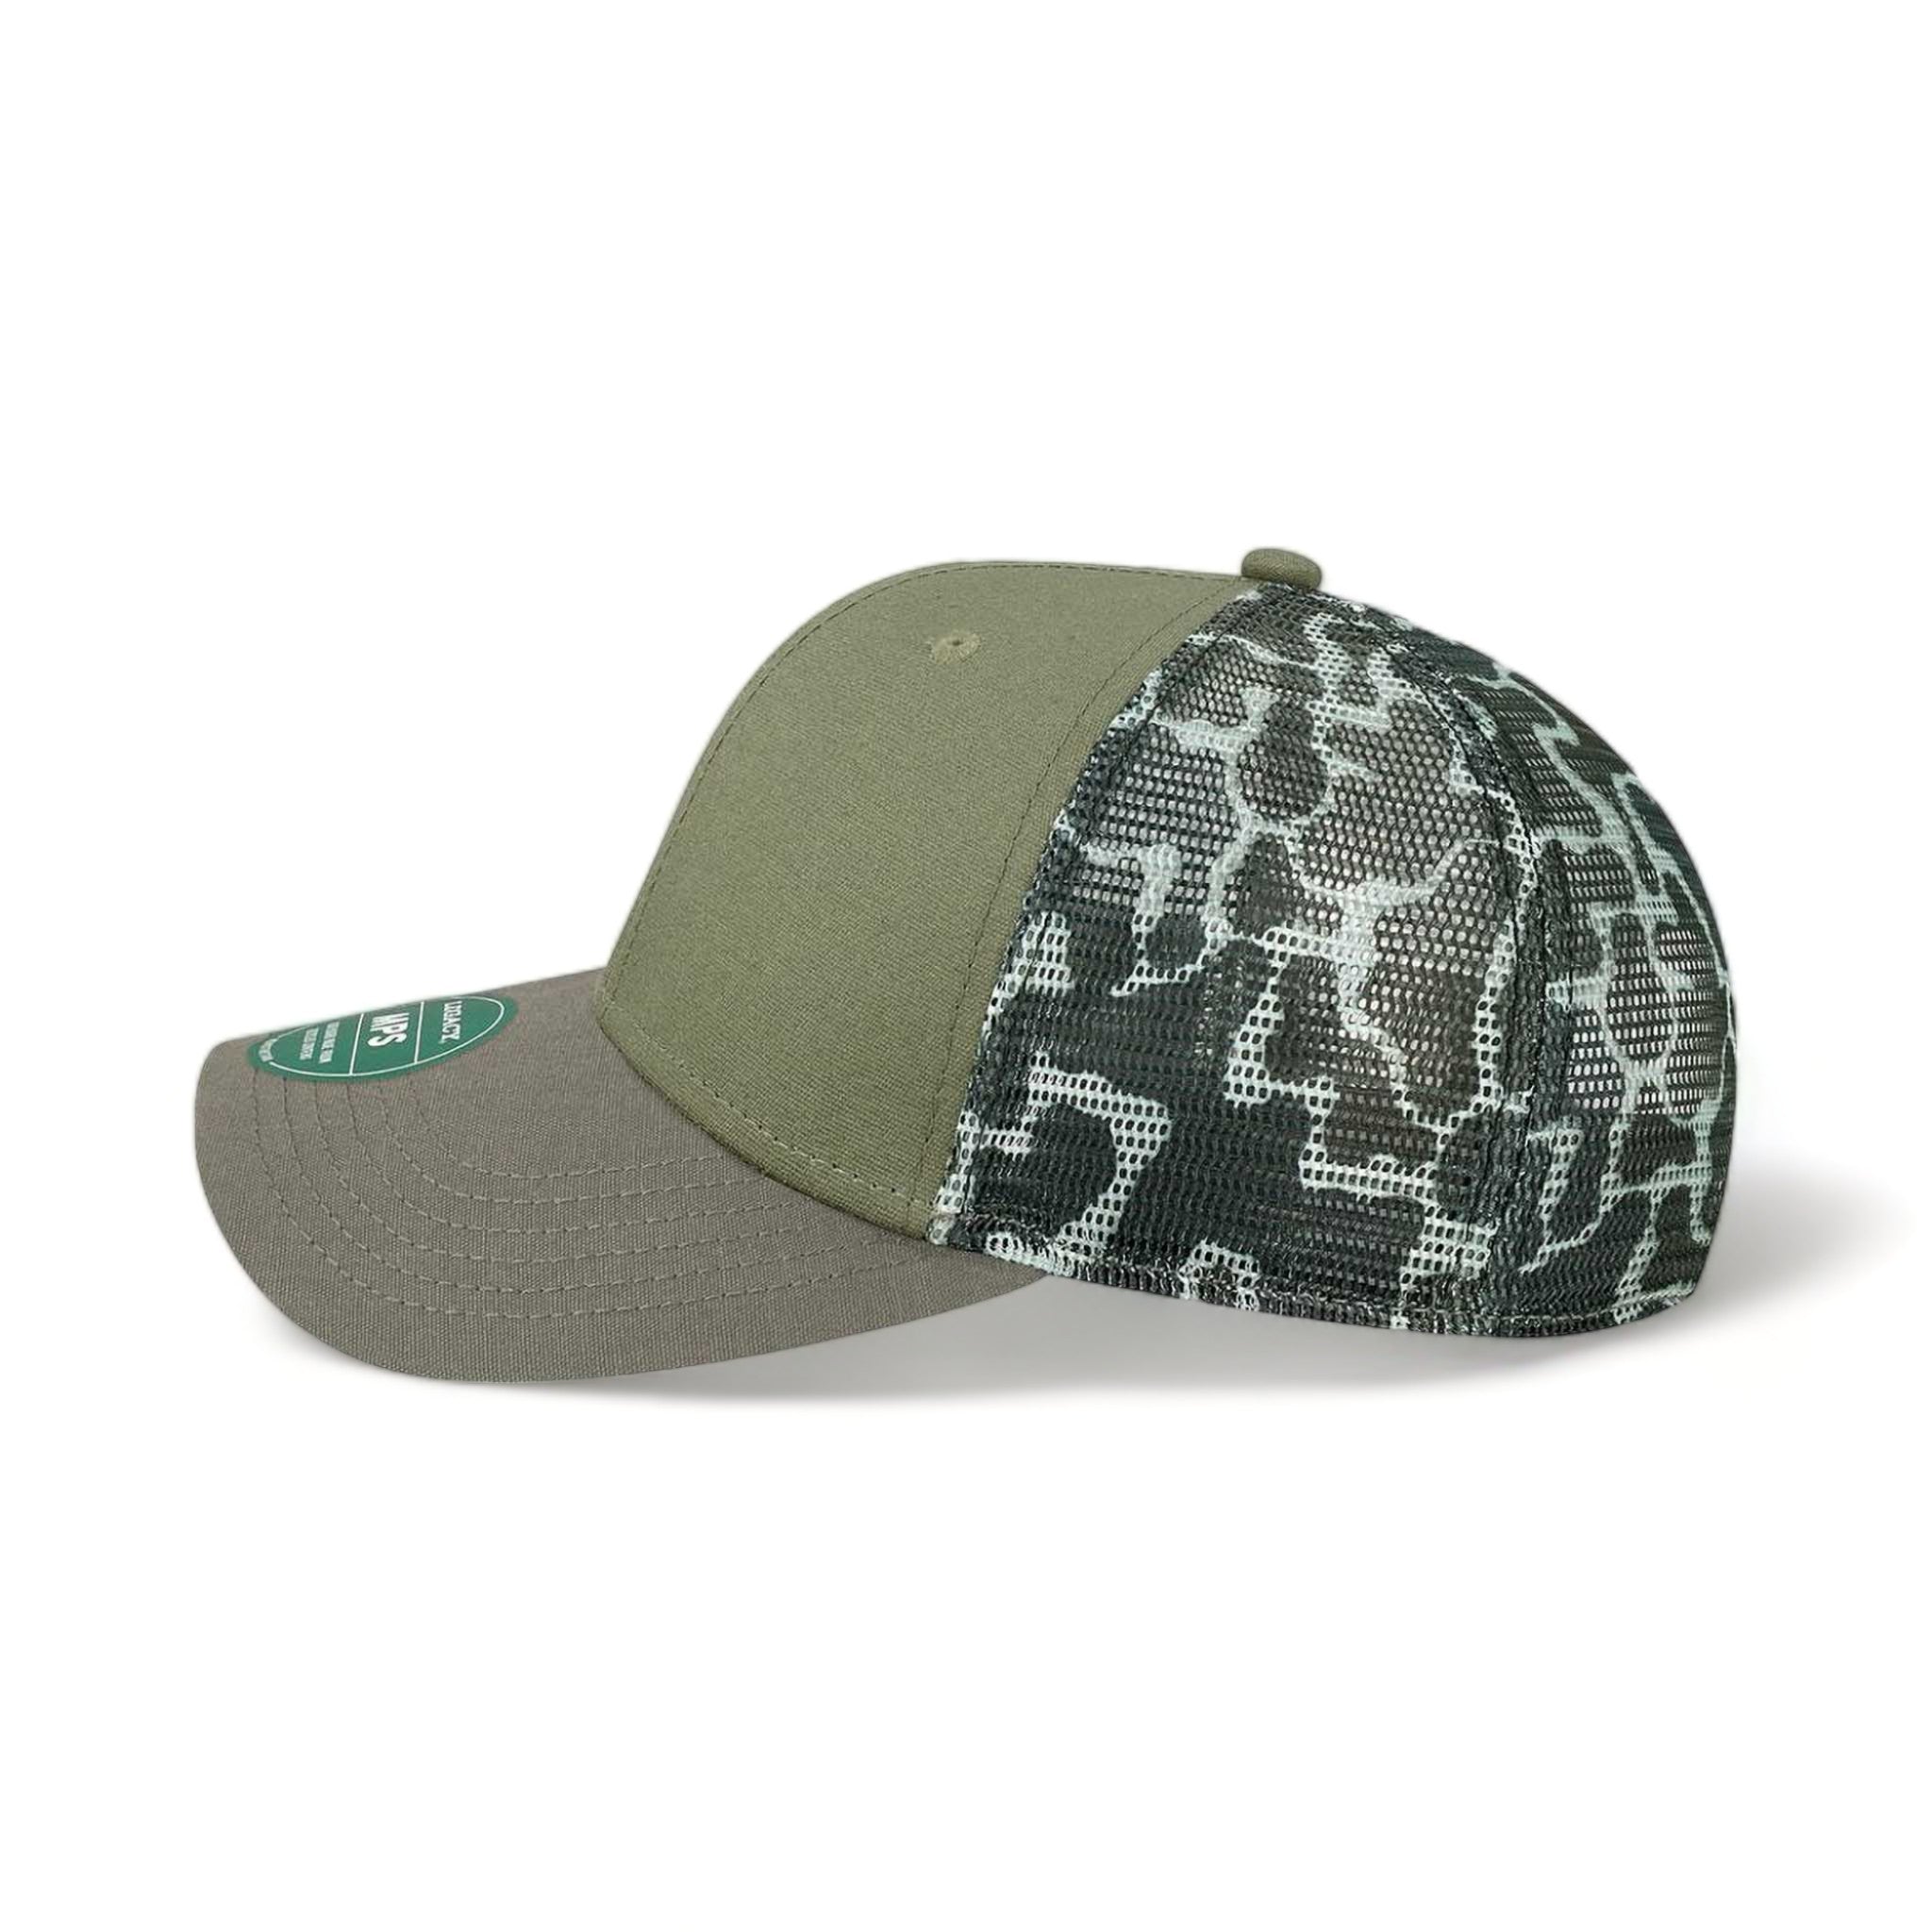 Side view of LEGACY MPS custom hat in olive, grey and grey camo